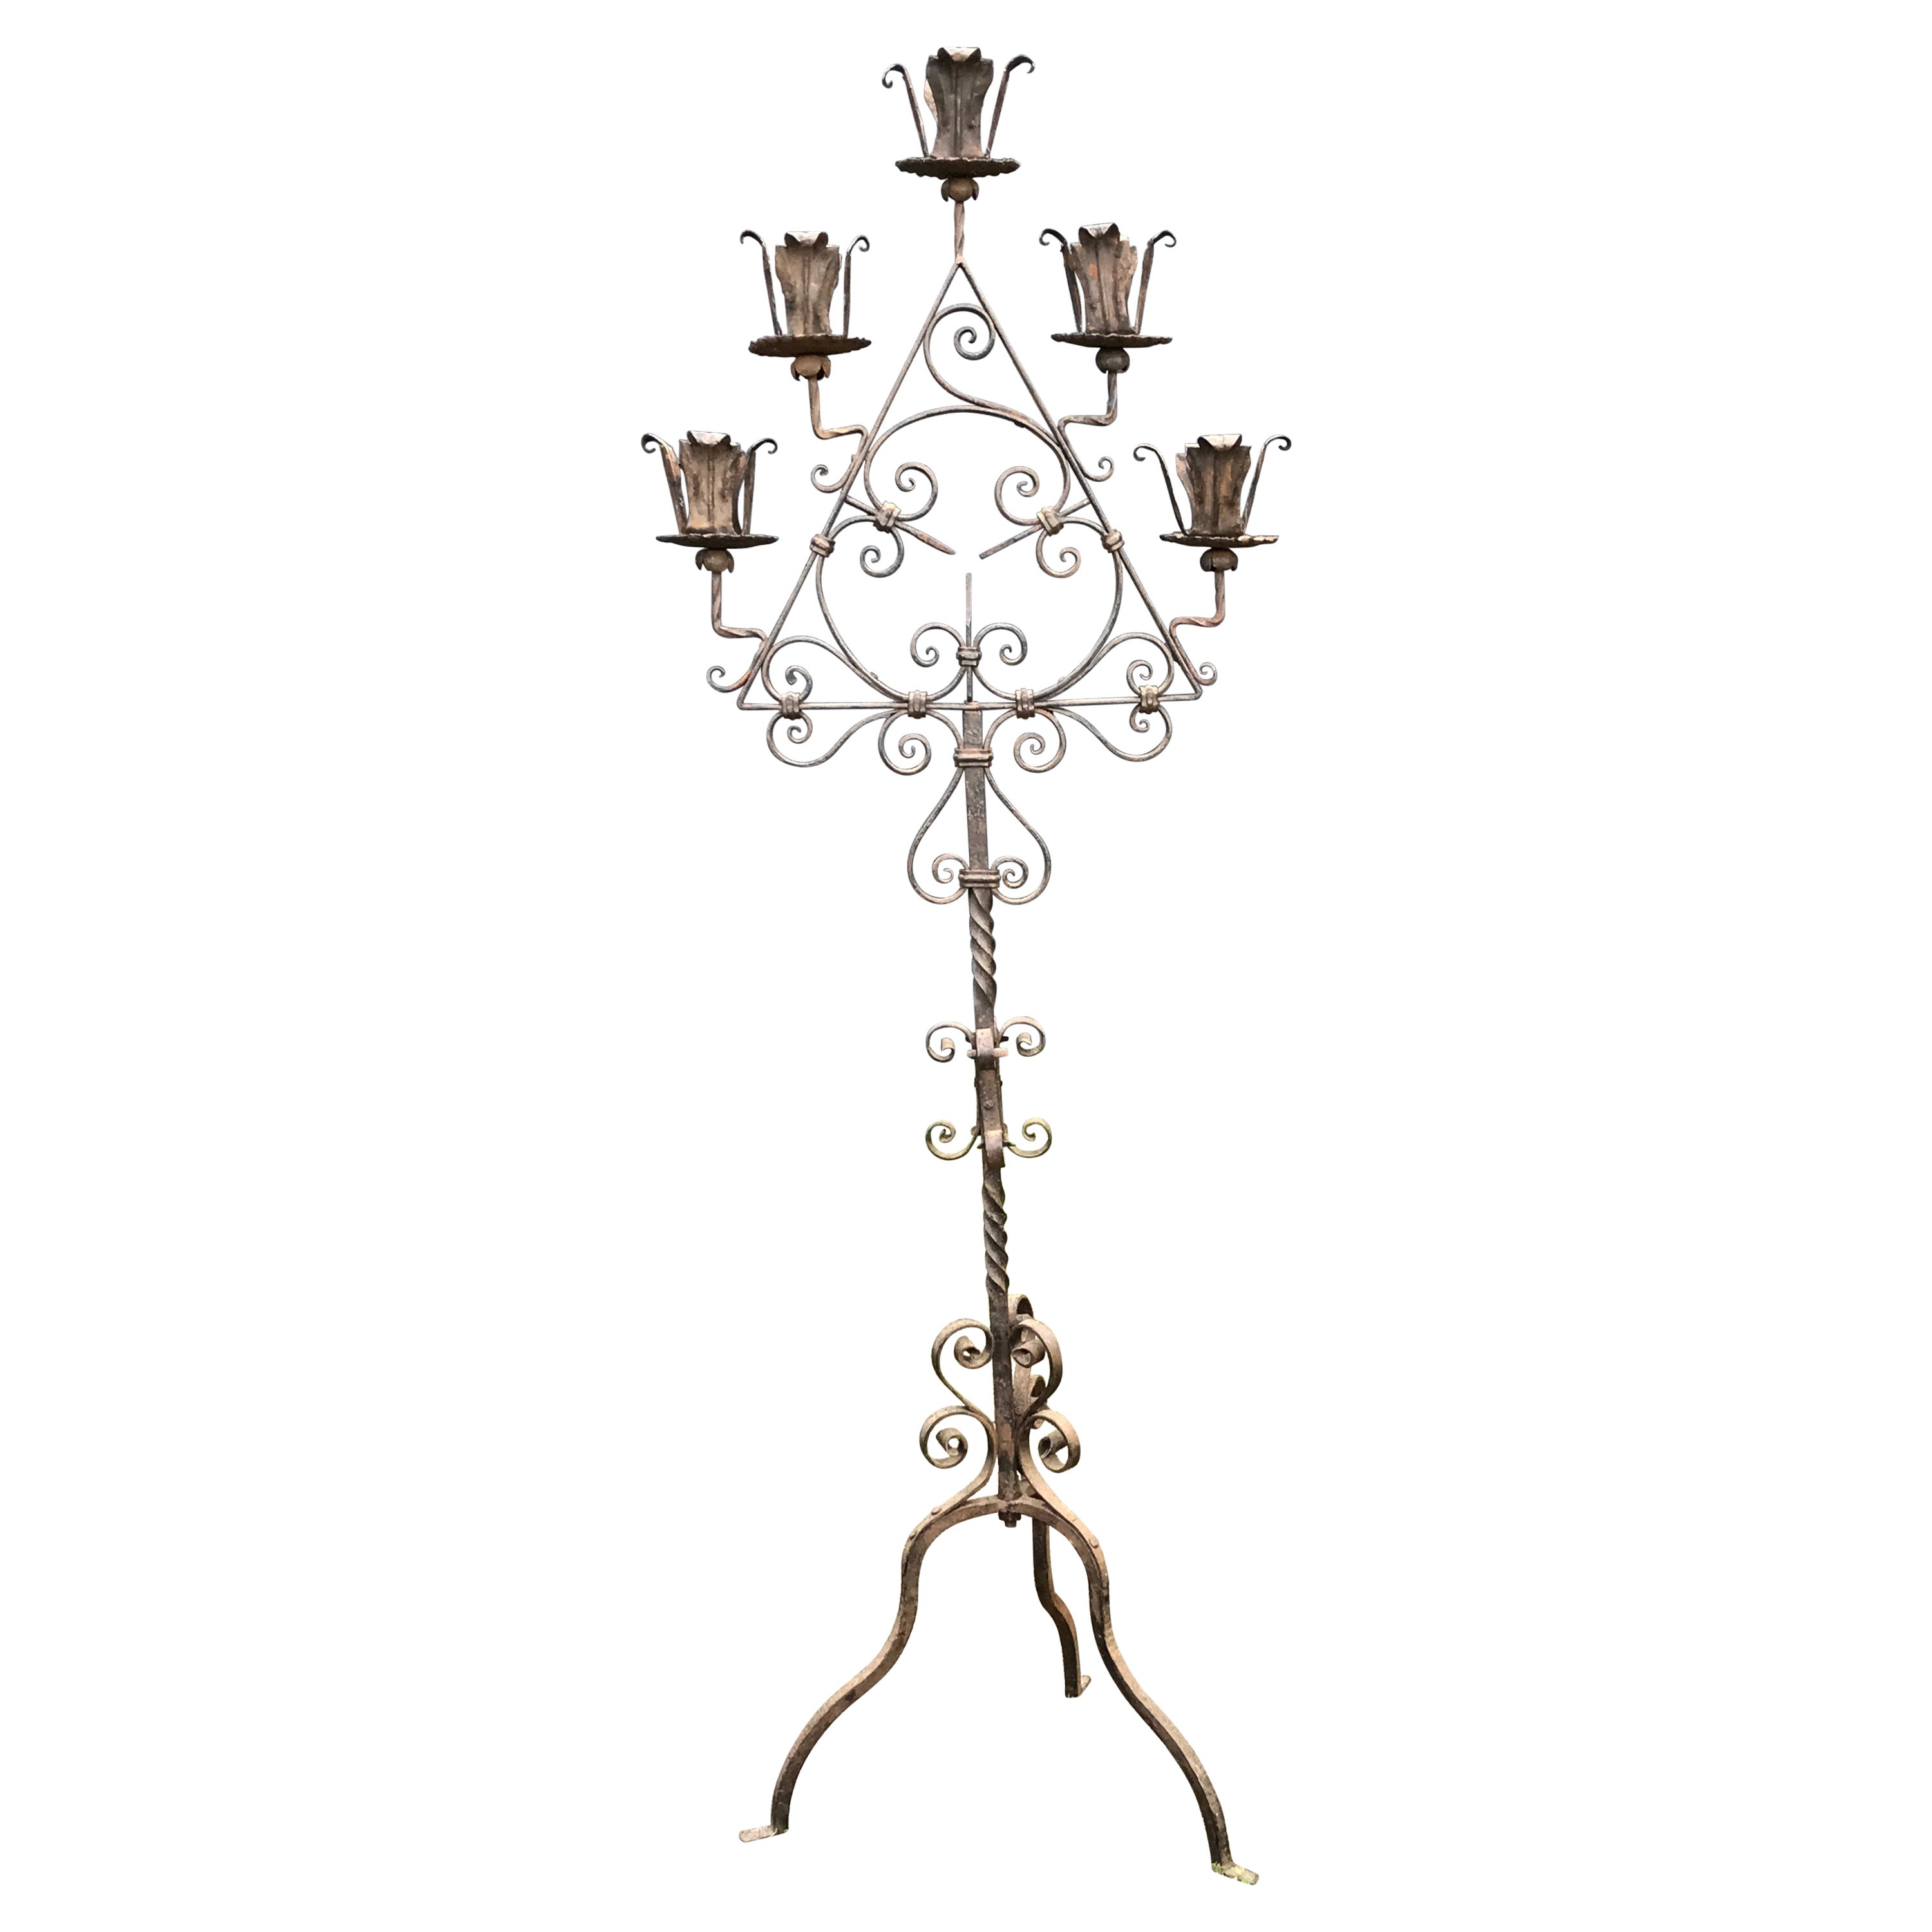 Torchere Italian Iron 5 Candle or Torches High Monumental